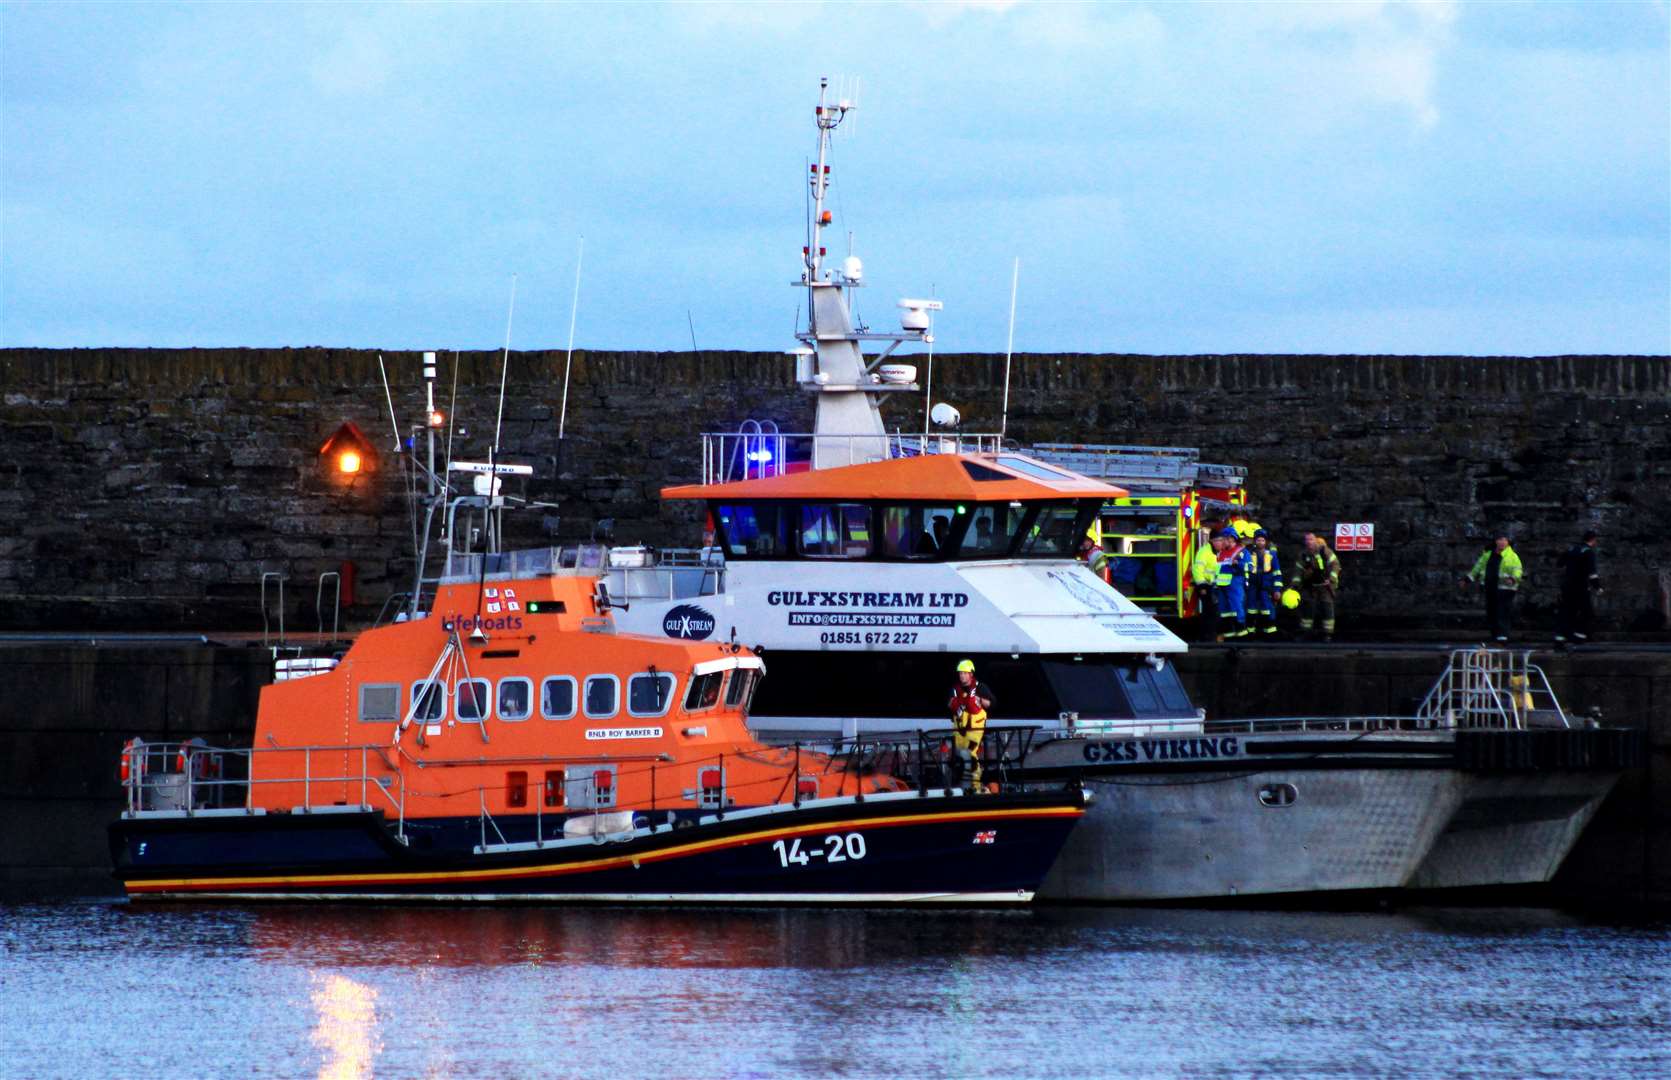 The Wick lifeboat Roy Barker II alongside the vessel shortly after 4pm. Picture: Alan Hendry